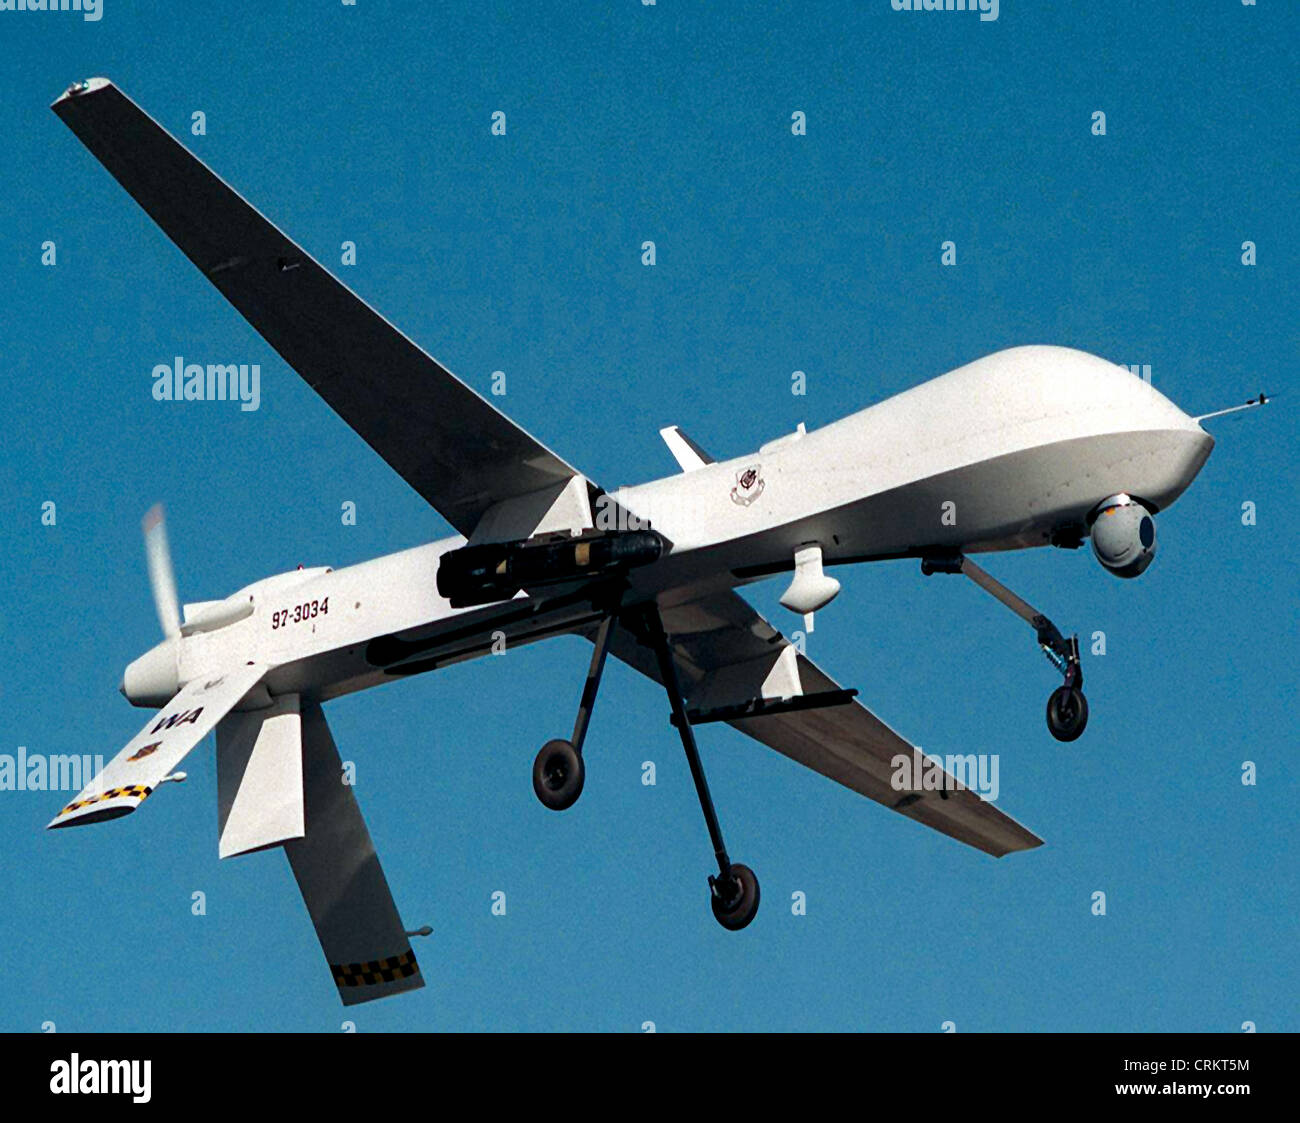 US Air Force MQ-1 Predator unmanned aerial vehicle Stock Photo